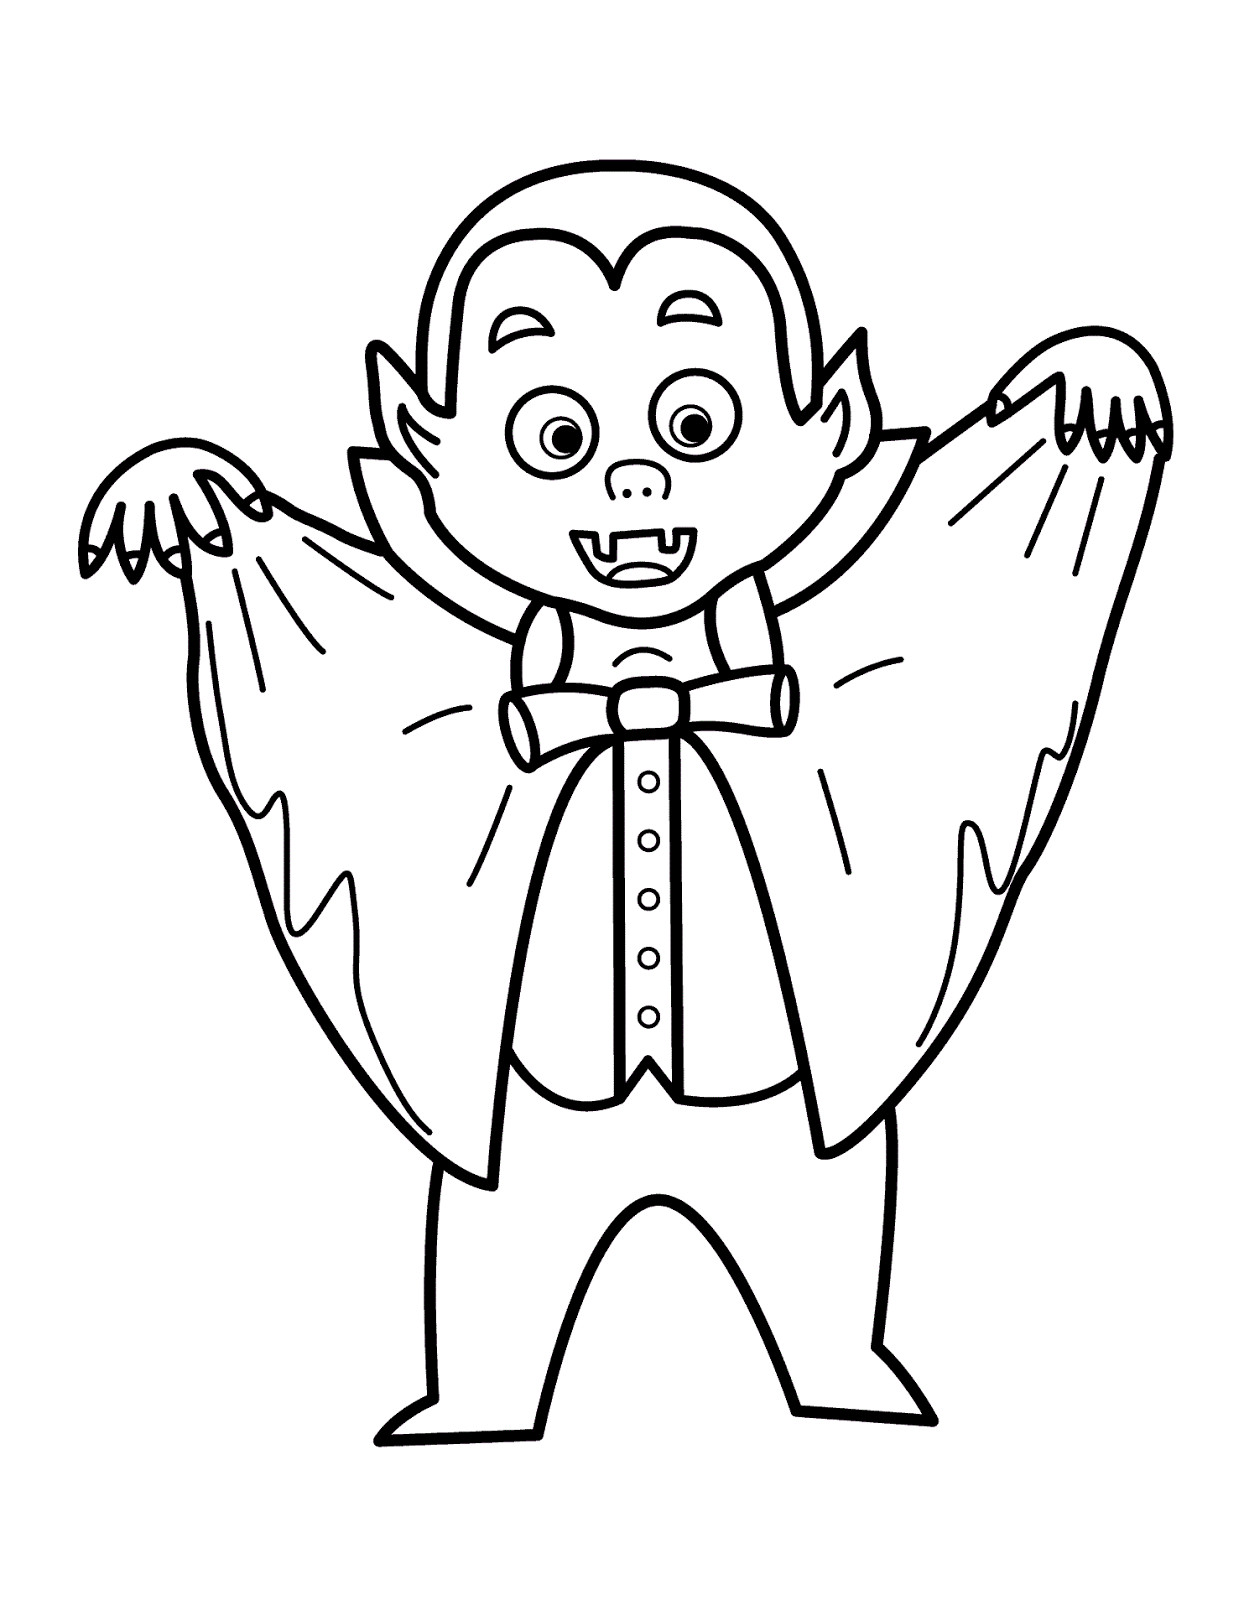 Vampire Coloring Pages
 Free Vampire Coloring Pages To Print